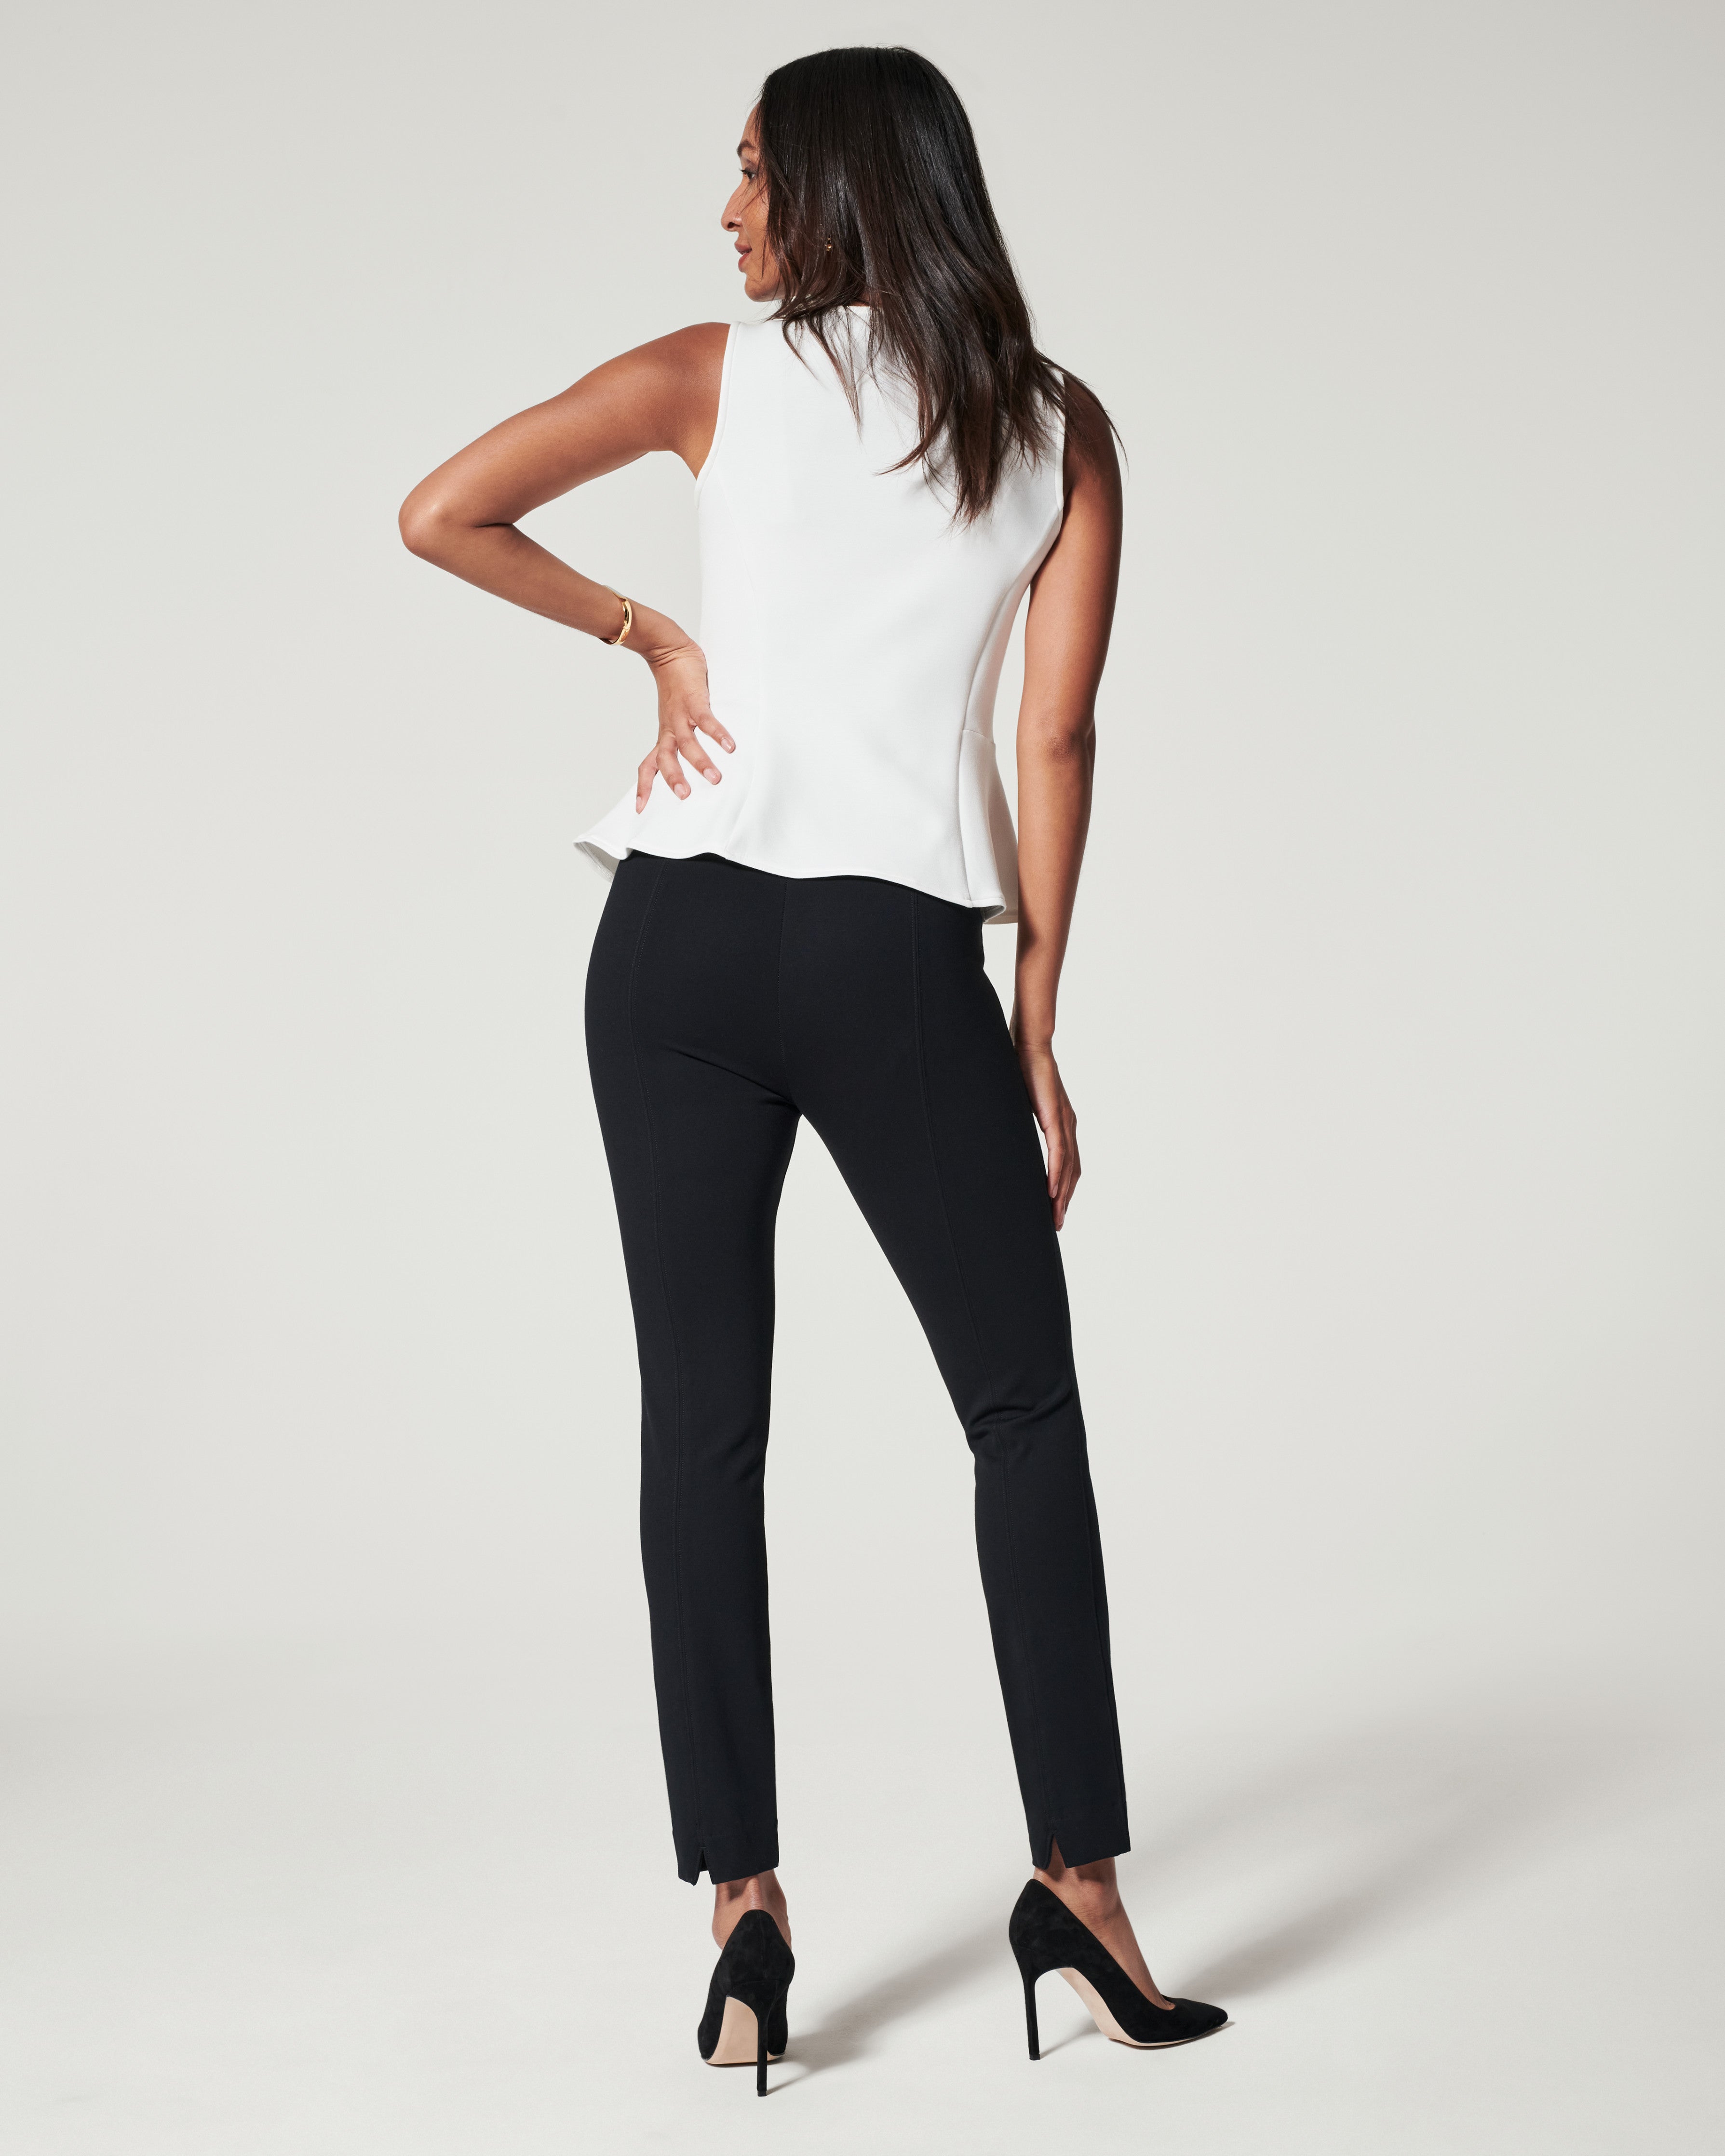 SPANX - @Kittywass (IG) looking *perfect* in our The Perfect Black Pant,  Ankle 4-Pocket! These pants are our go-to for any occasion or event with  smoothing ponte fabric, a comfortable, pull-on design